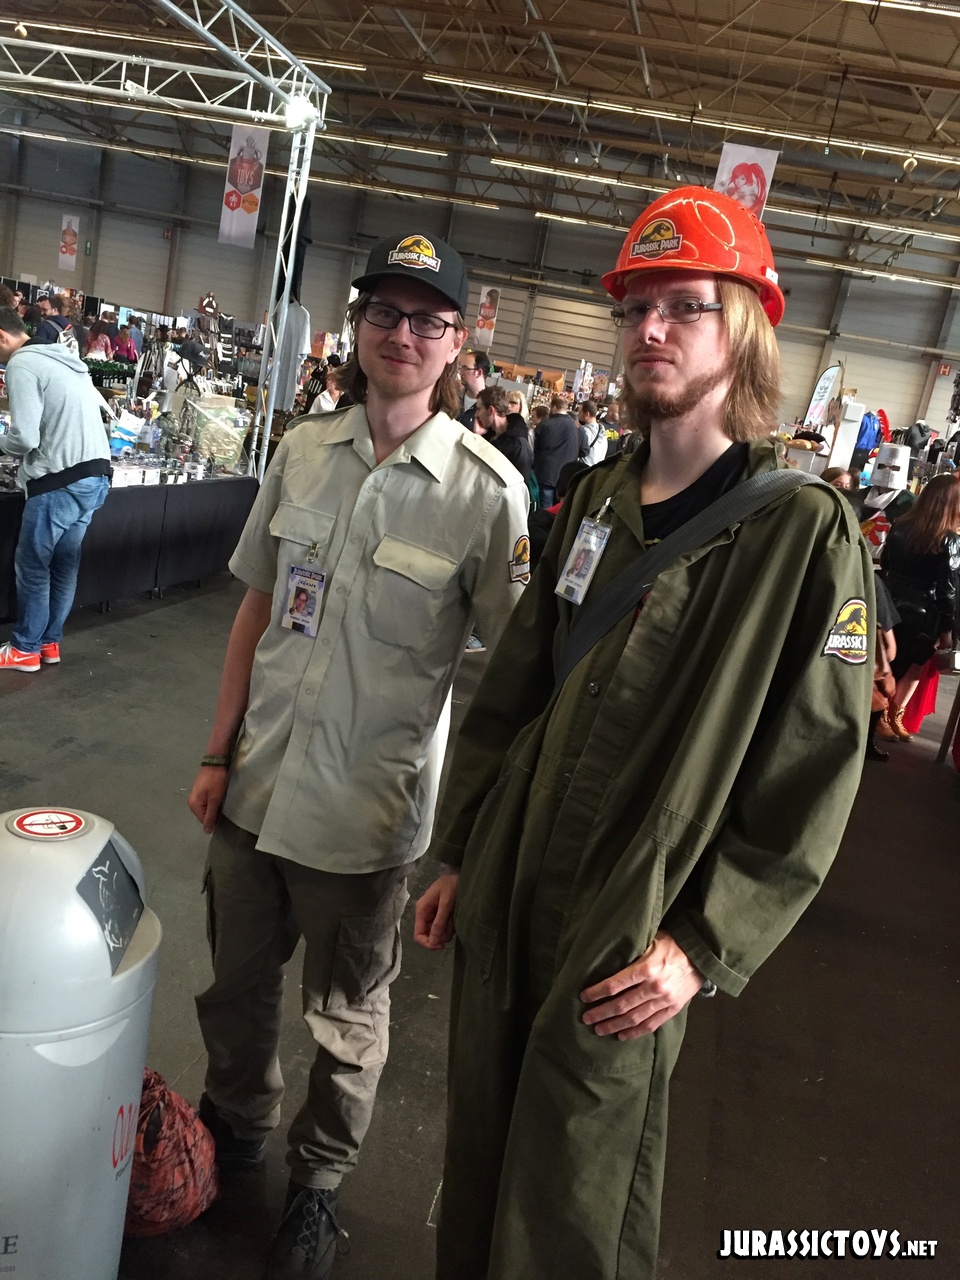 Jurassic Park cosplayers at convention